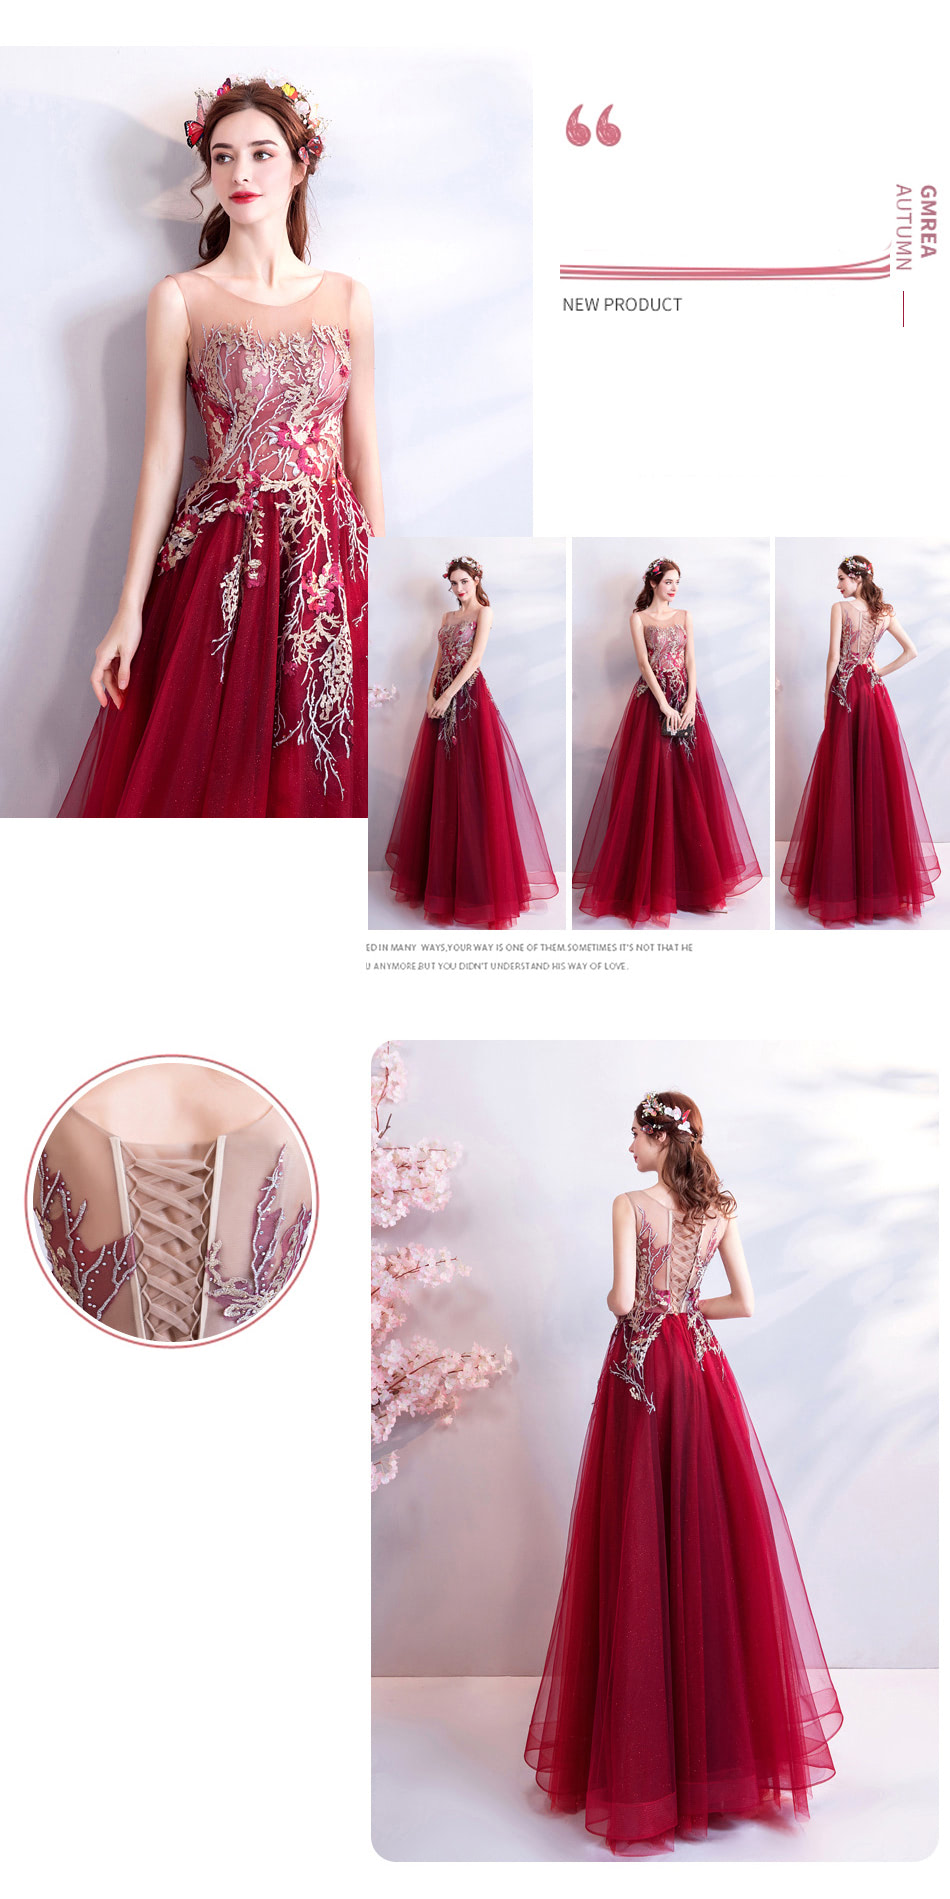 Gorgeous-Red-Couture-Dress-for-Wedding-Party-Prom-All-Occasions09.jpg